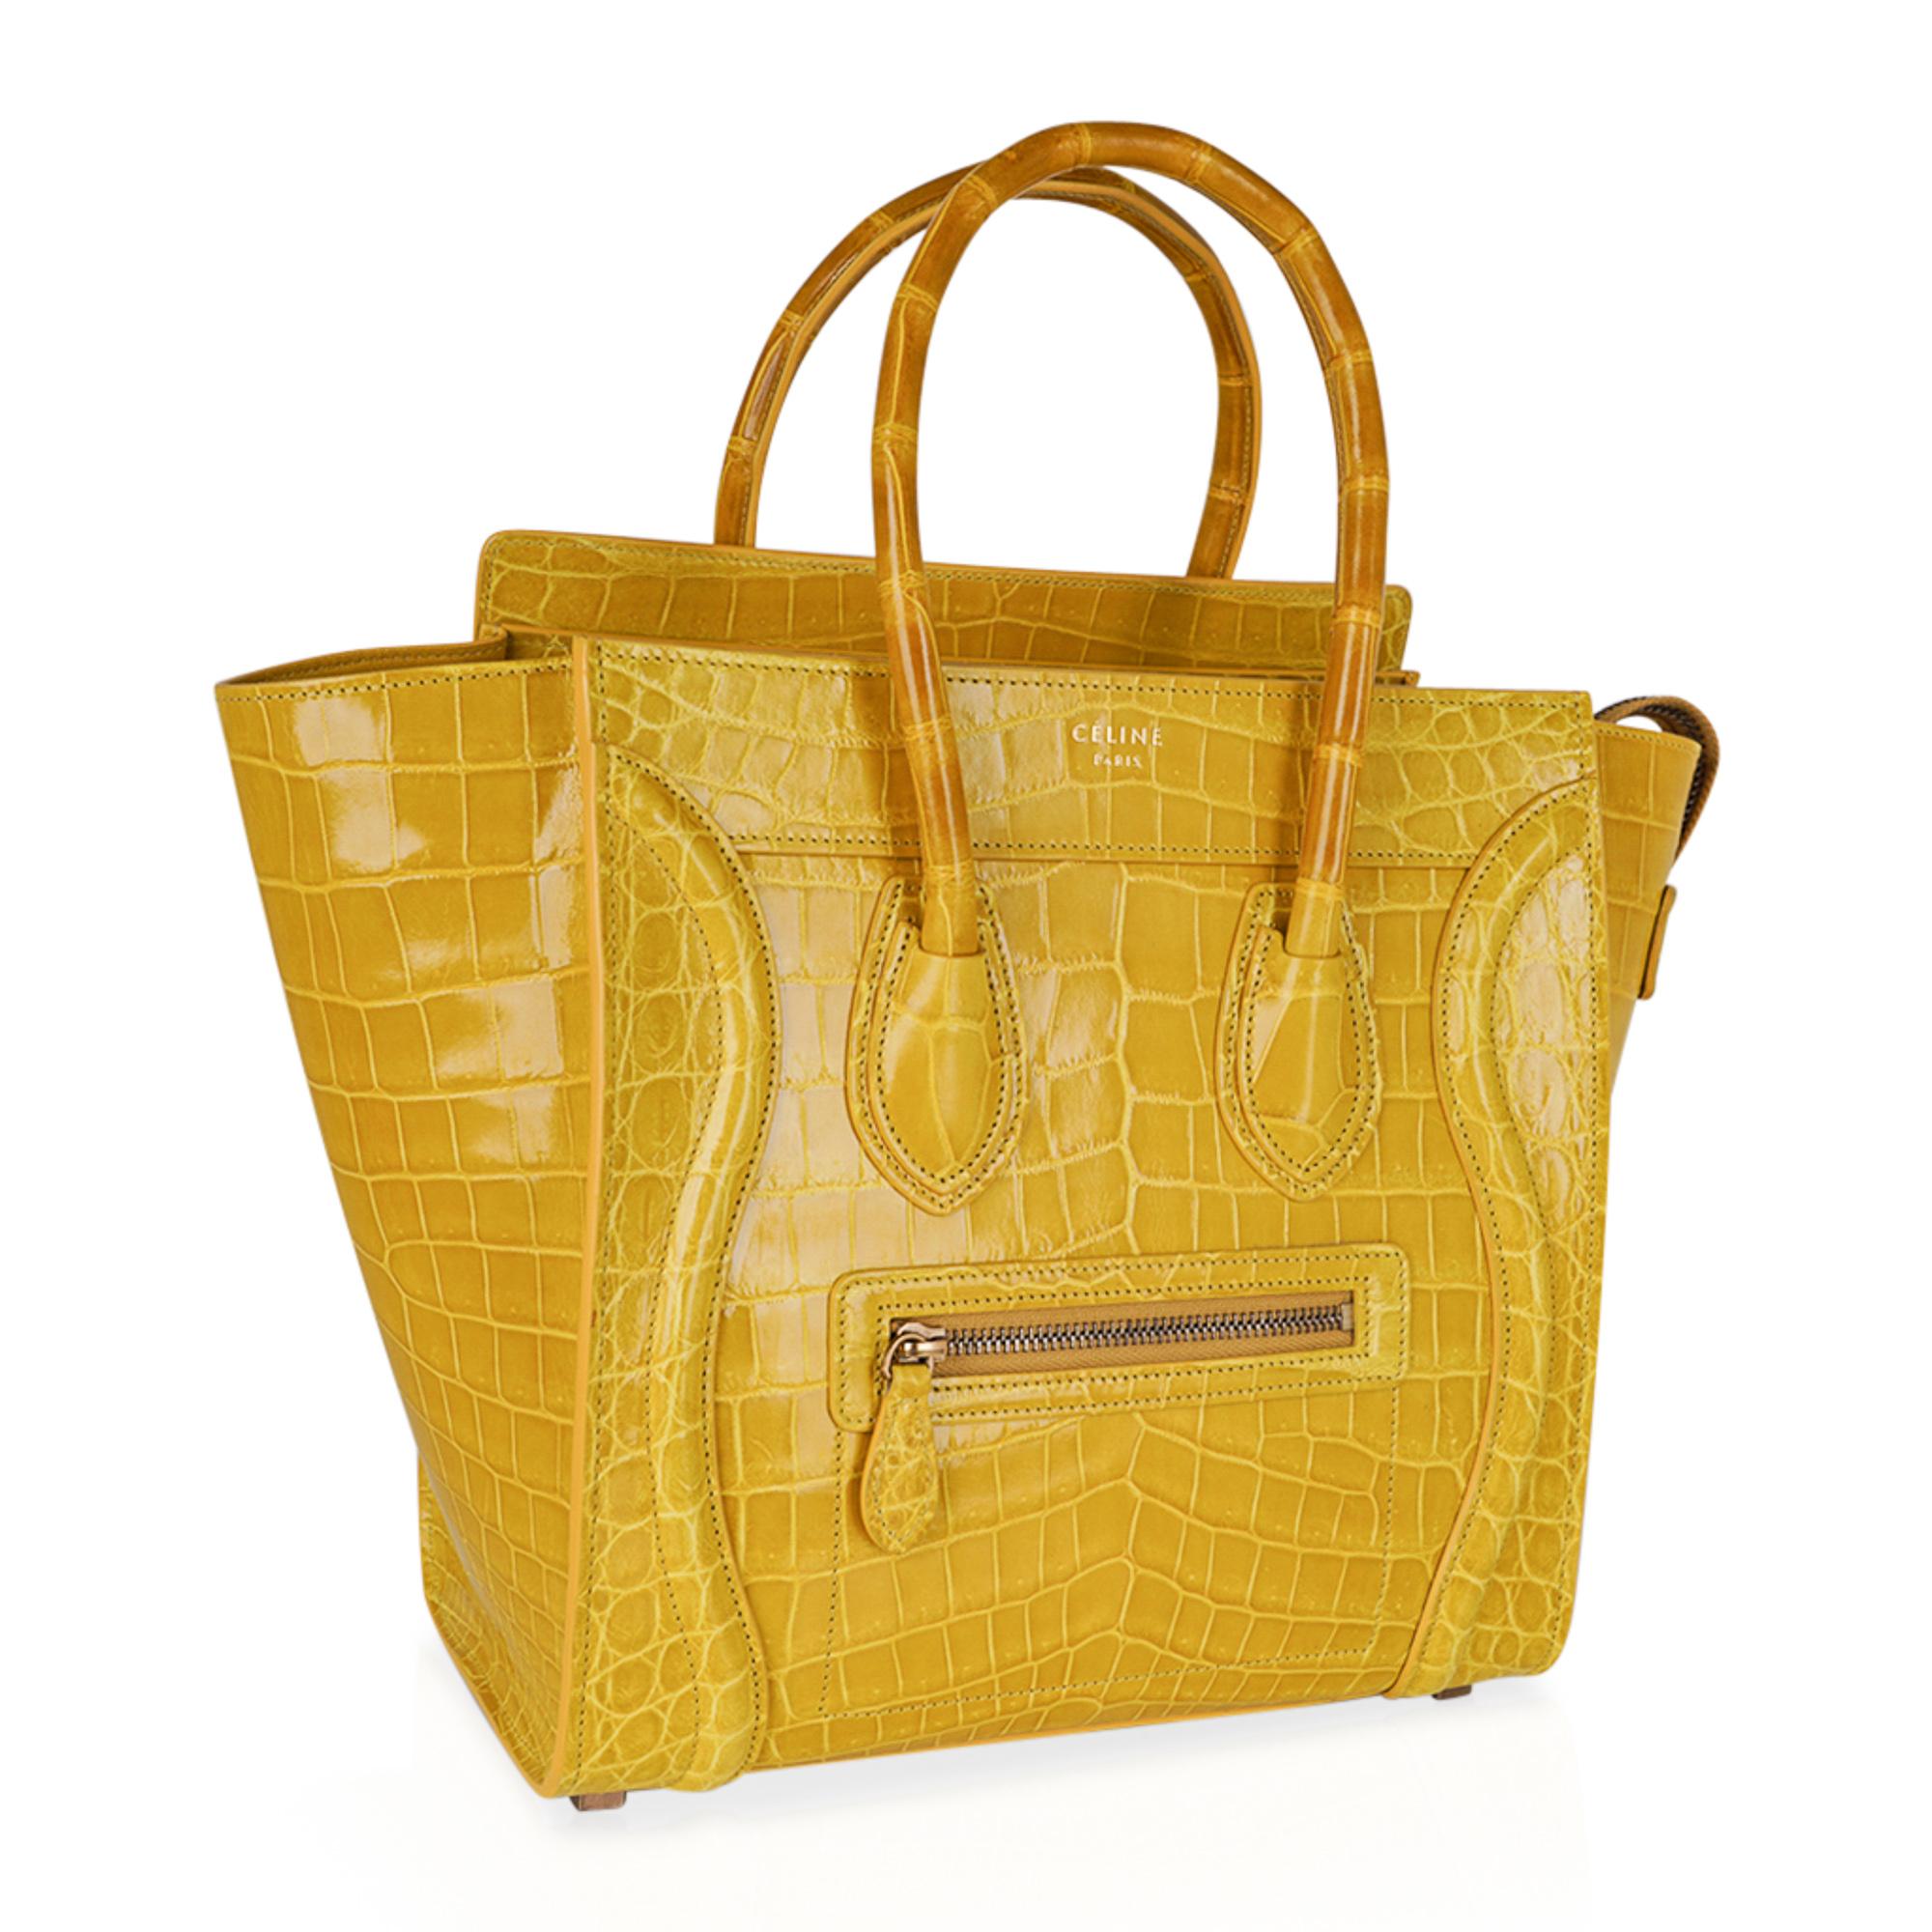 Guaranteed authentic Celine Yellow Micro Luggage tote featured in rare Yellow Crocodile skin.
An iconic beauty and one of the most sought after bags.
Zip top with 2 interior slot pockets and 1 zip pocket.
1 exterior zip pocket.
4 metal feet.
CELINE